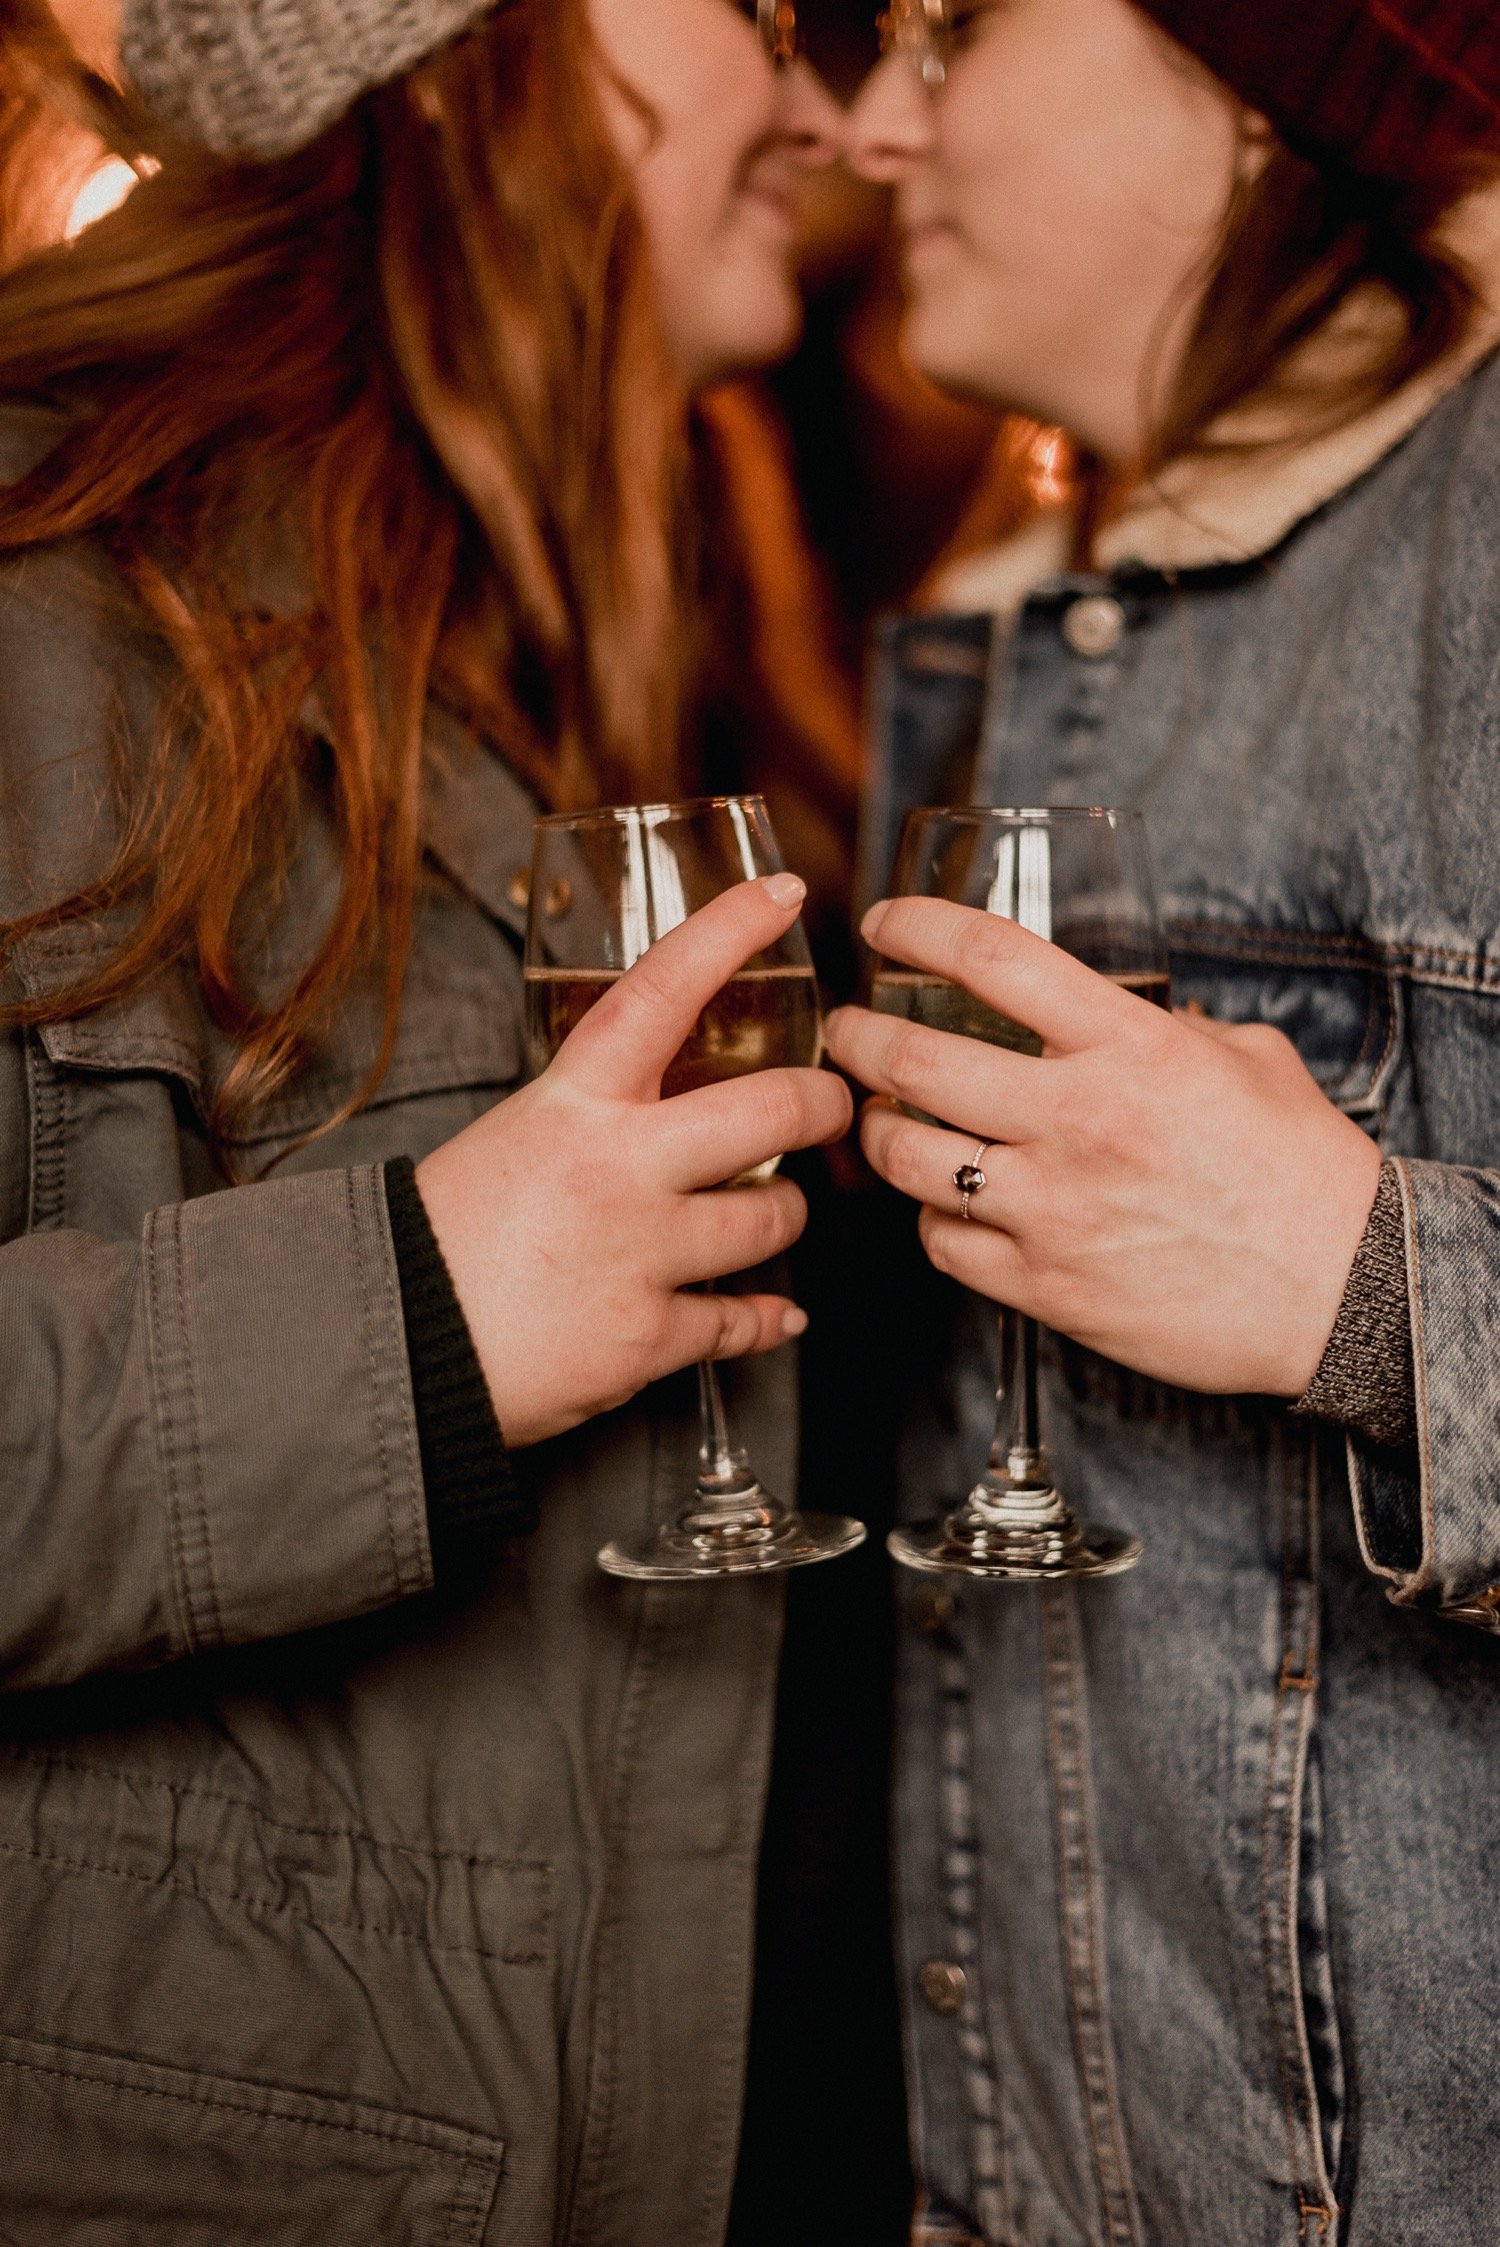 Couple-celebrate-their-engagement-by-showing-off-their-rings-and-drinking-champagne.jpg (2).jpg